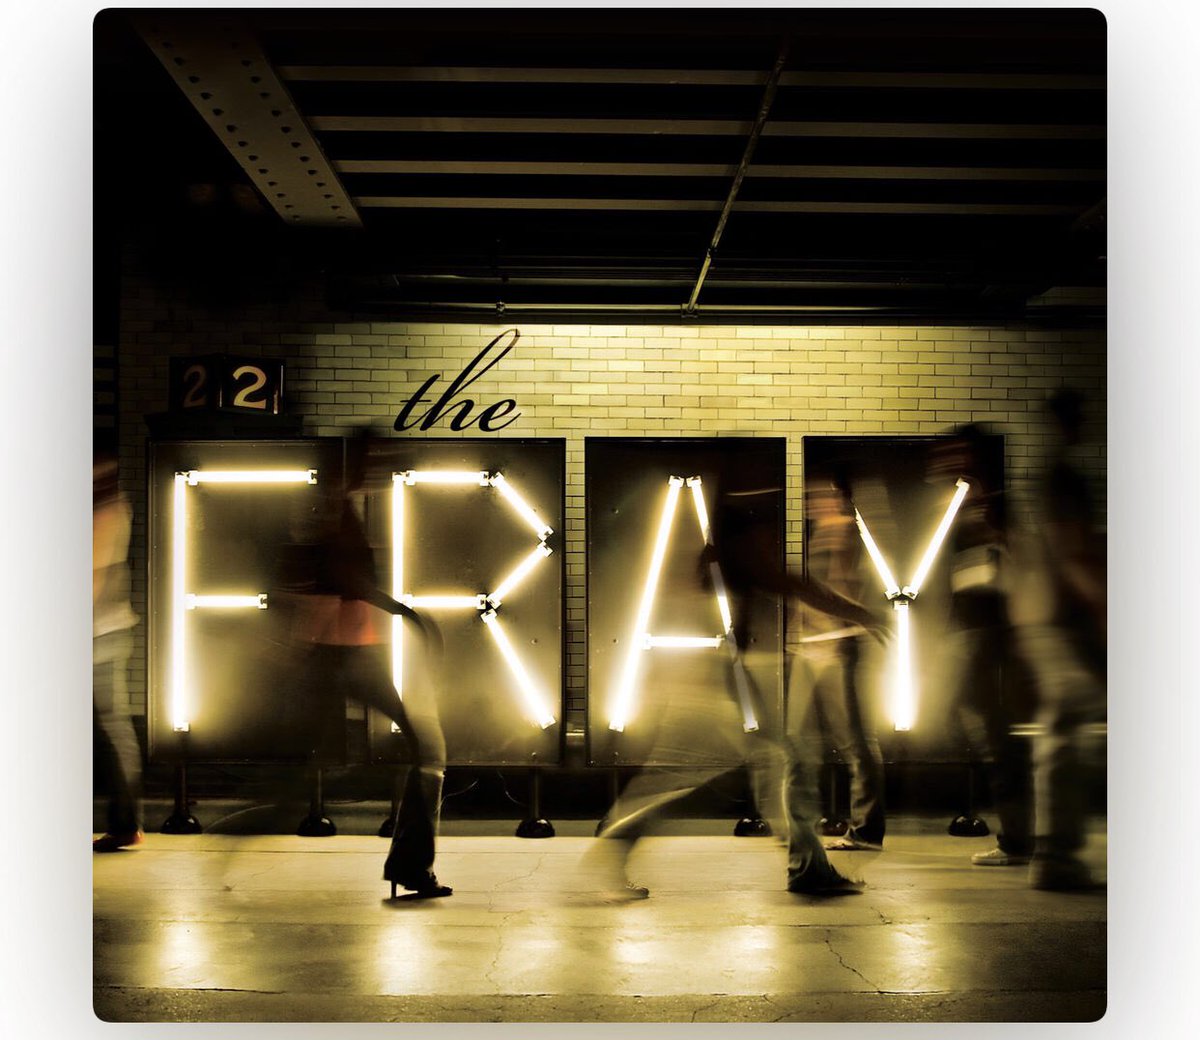 43. The Fray - You found me